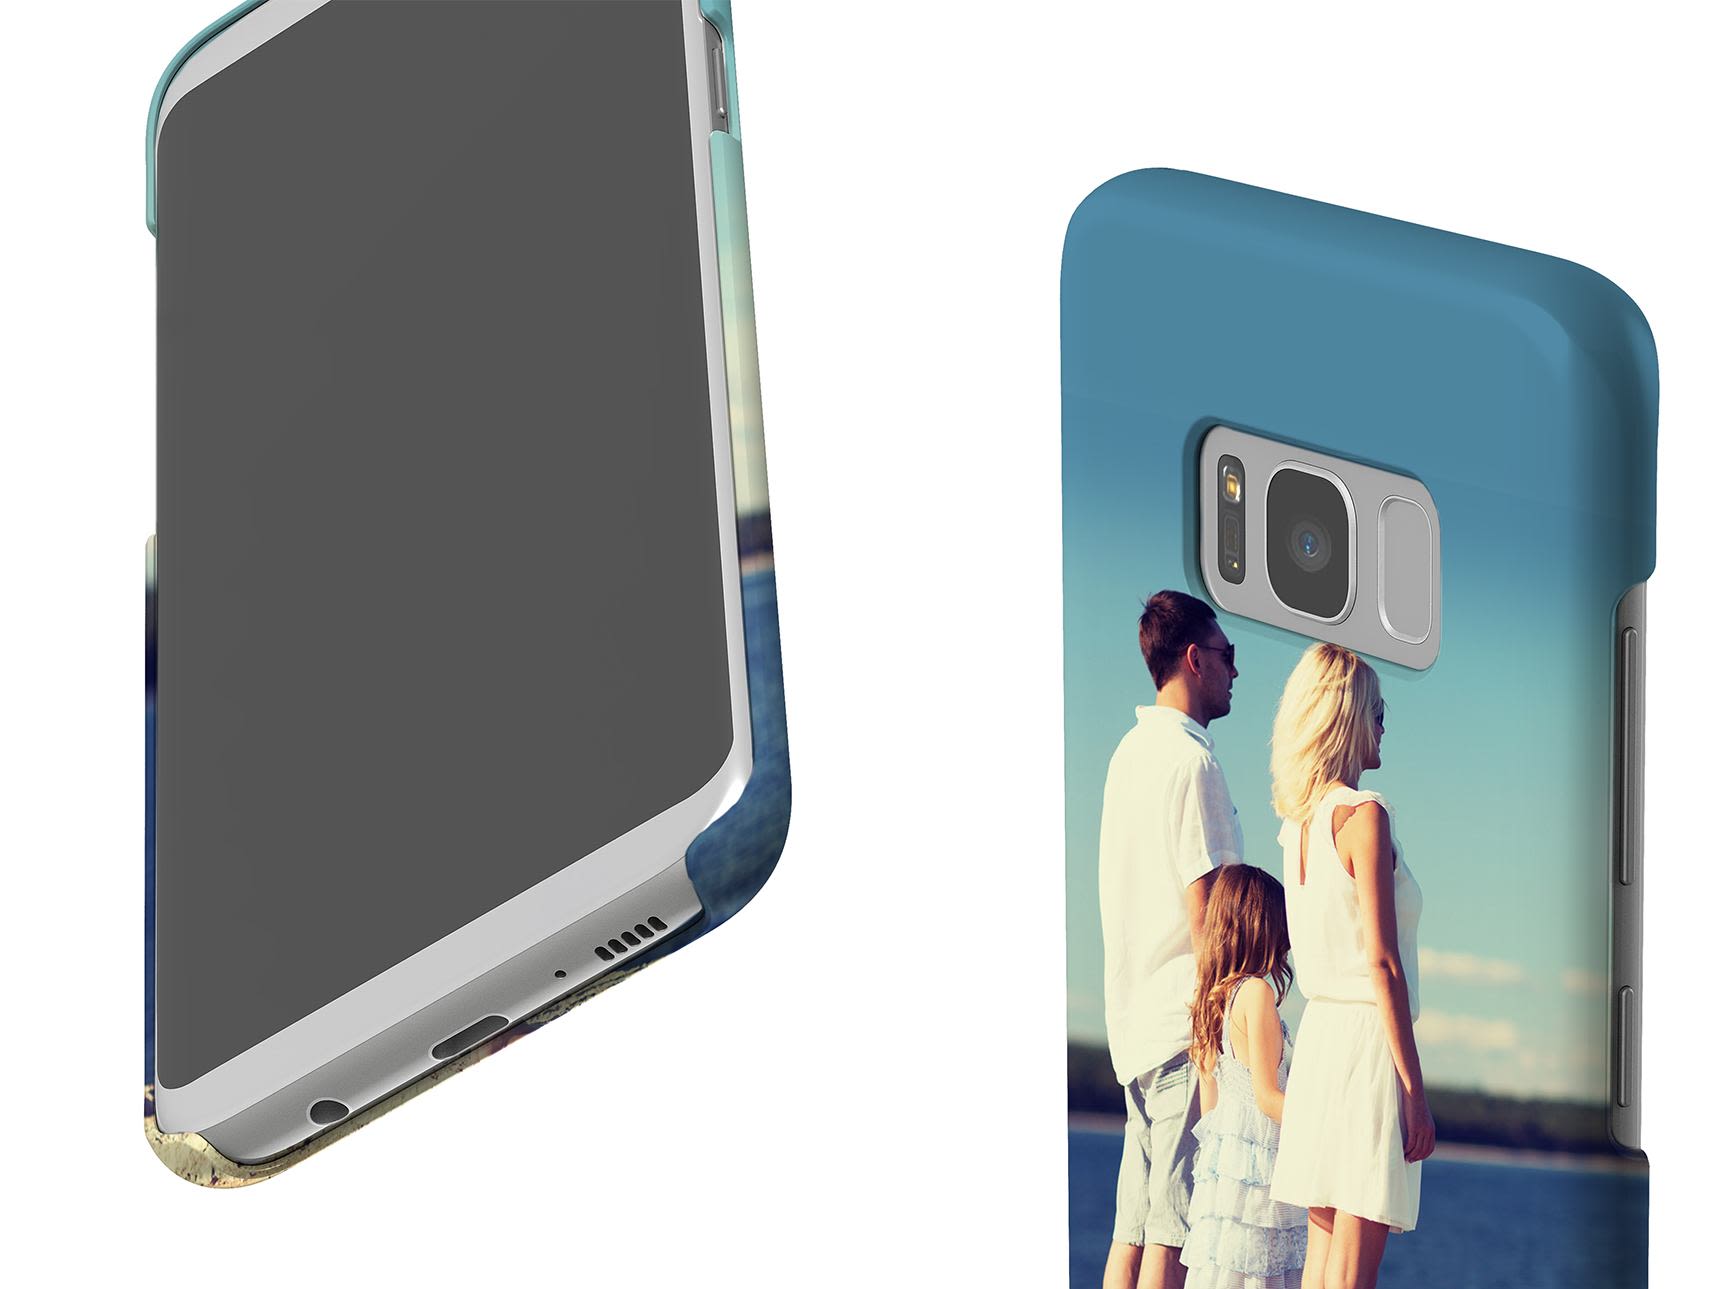 Buy Handmade Samsung Galaxy s9 plus case covered with repurposed